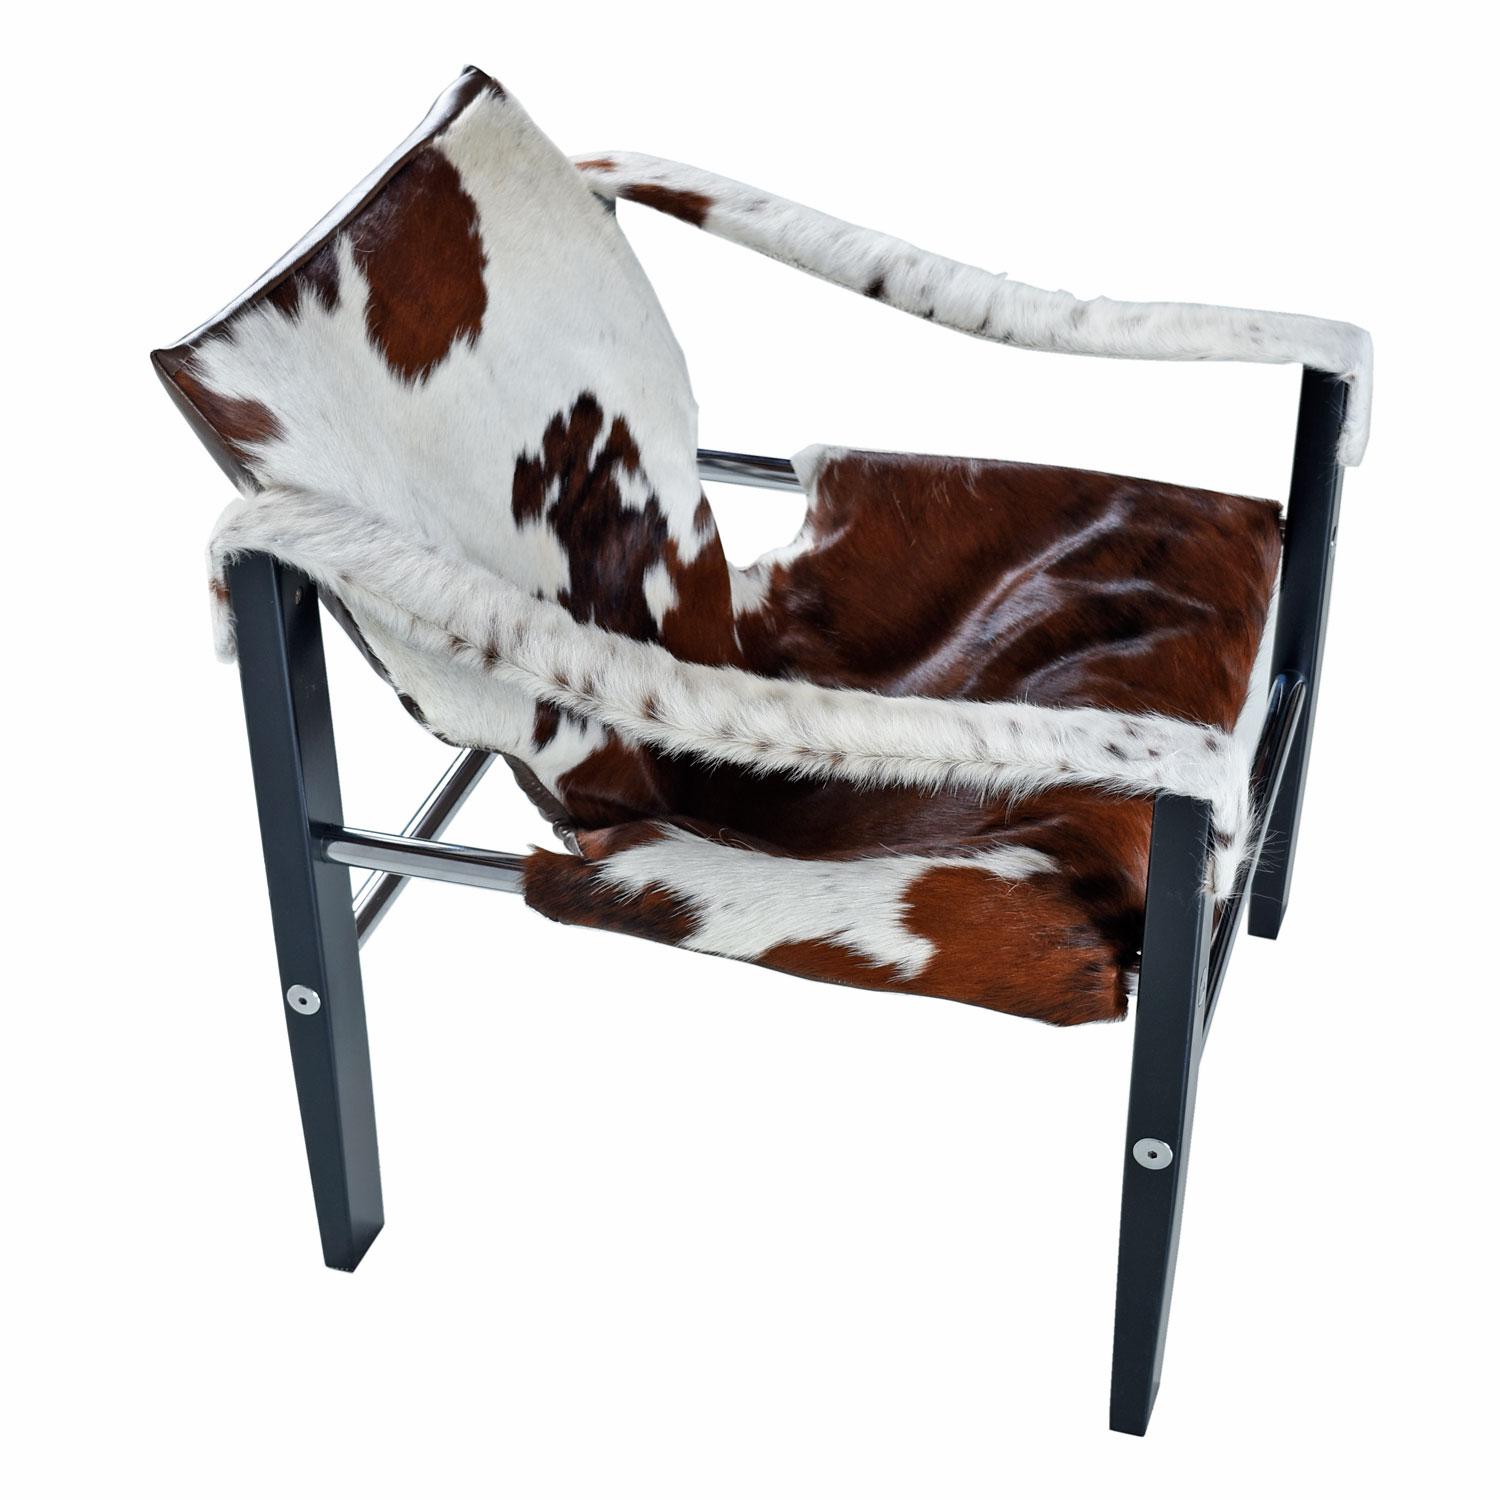 Our restoration team has raised the bar for the Safari chair. Not only did we go with new, authentic cowhide leather, but the frame has been repainted to match the original black satin finish. The fuzzy hide arm slings finish off the look and help